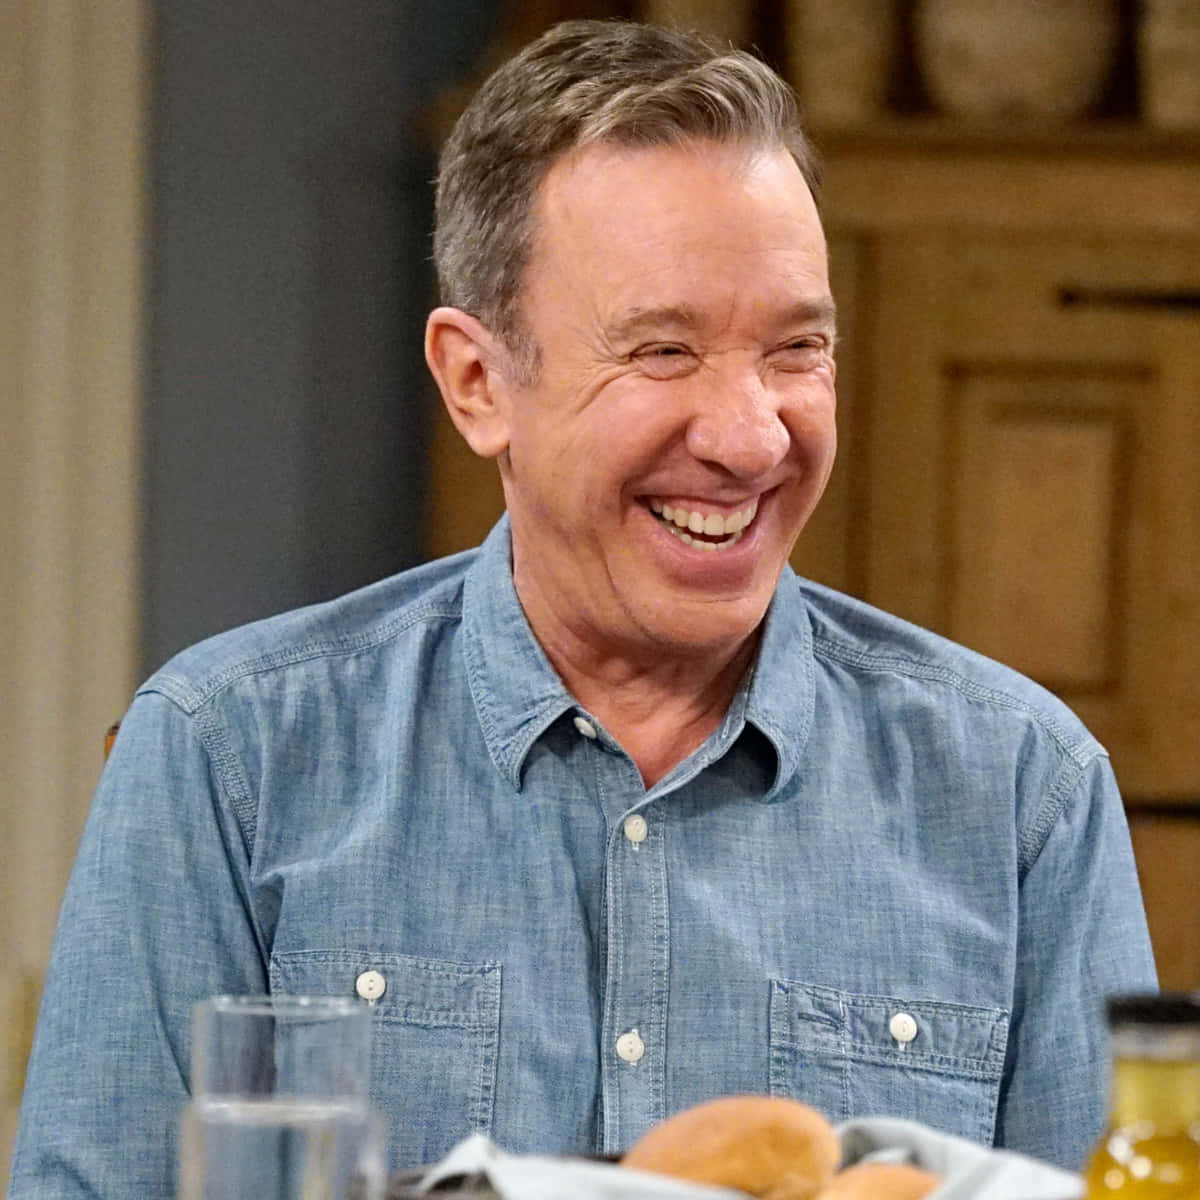 Actor Tim Allen in a Promotional Image Wallpaper